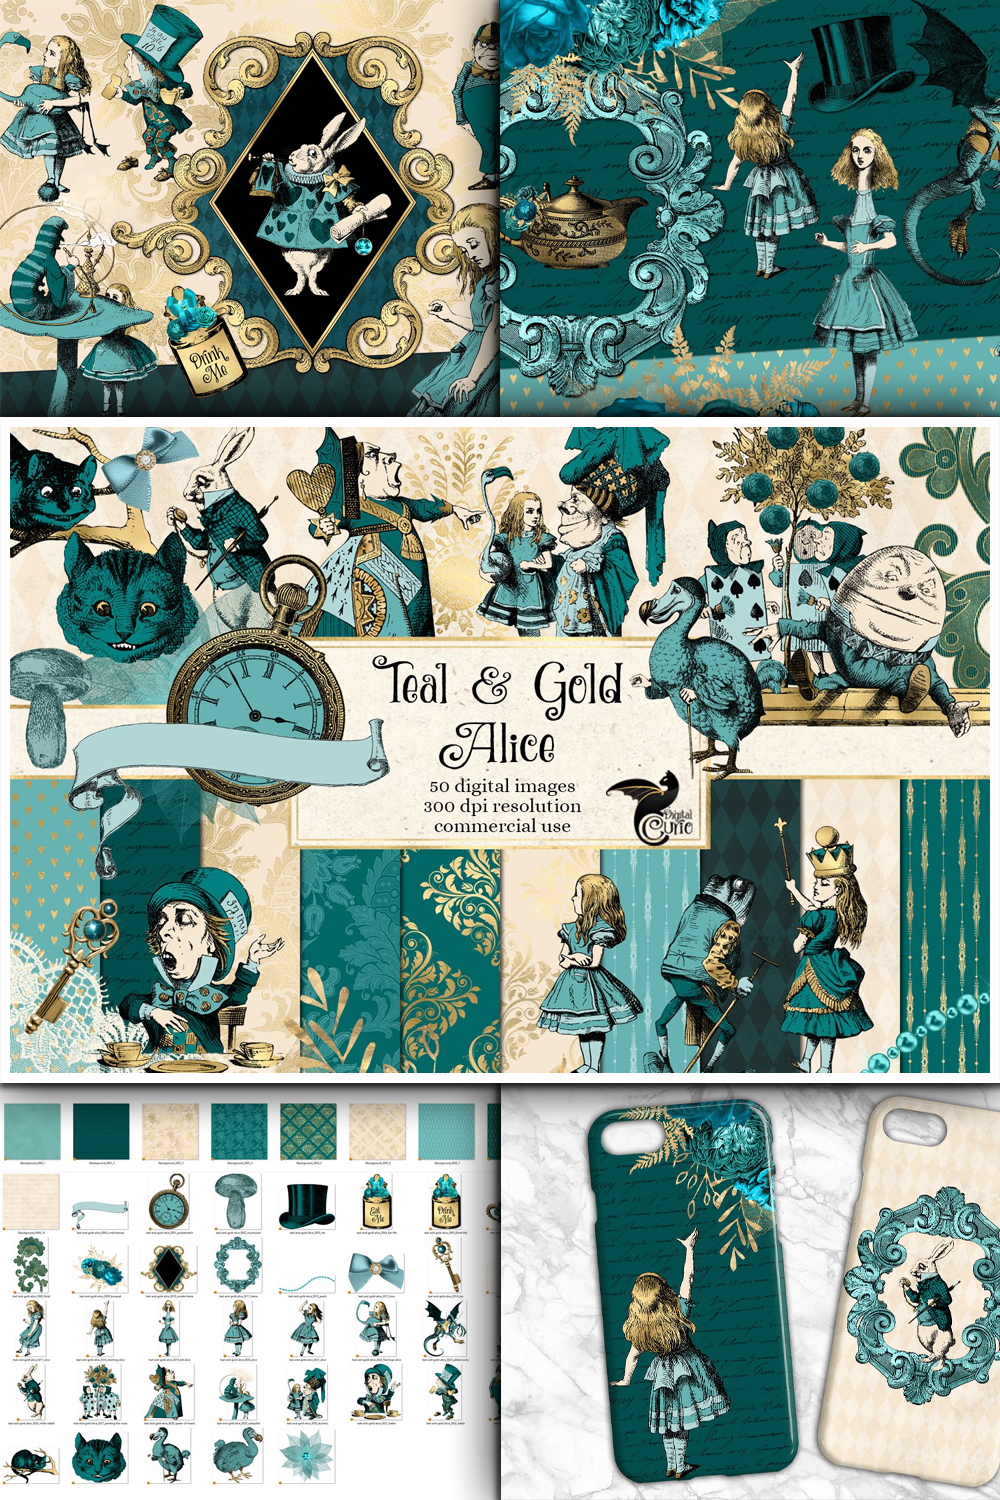 Teal and gold alice in wonderland graphics of pinterest.